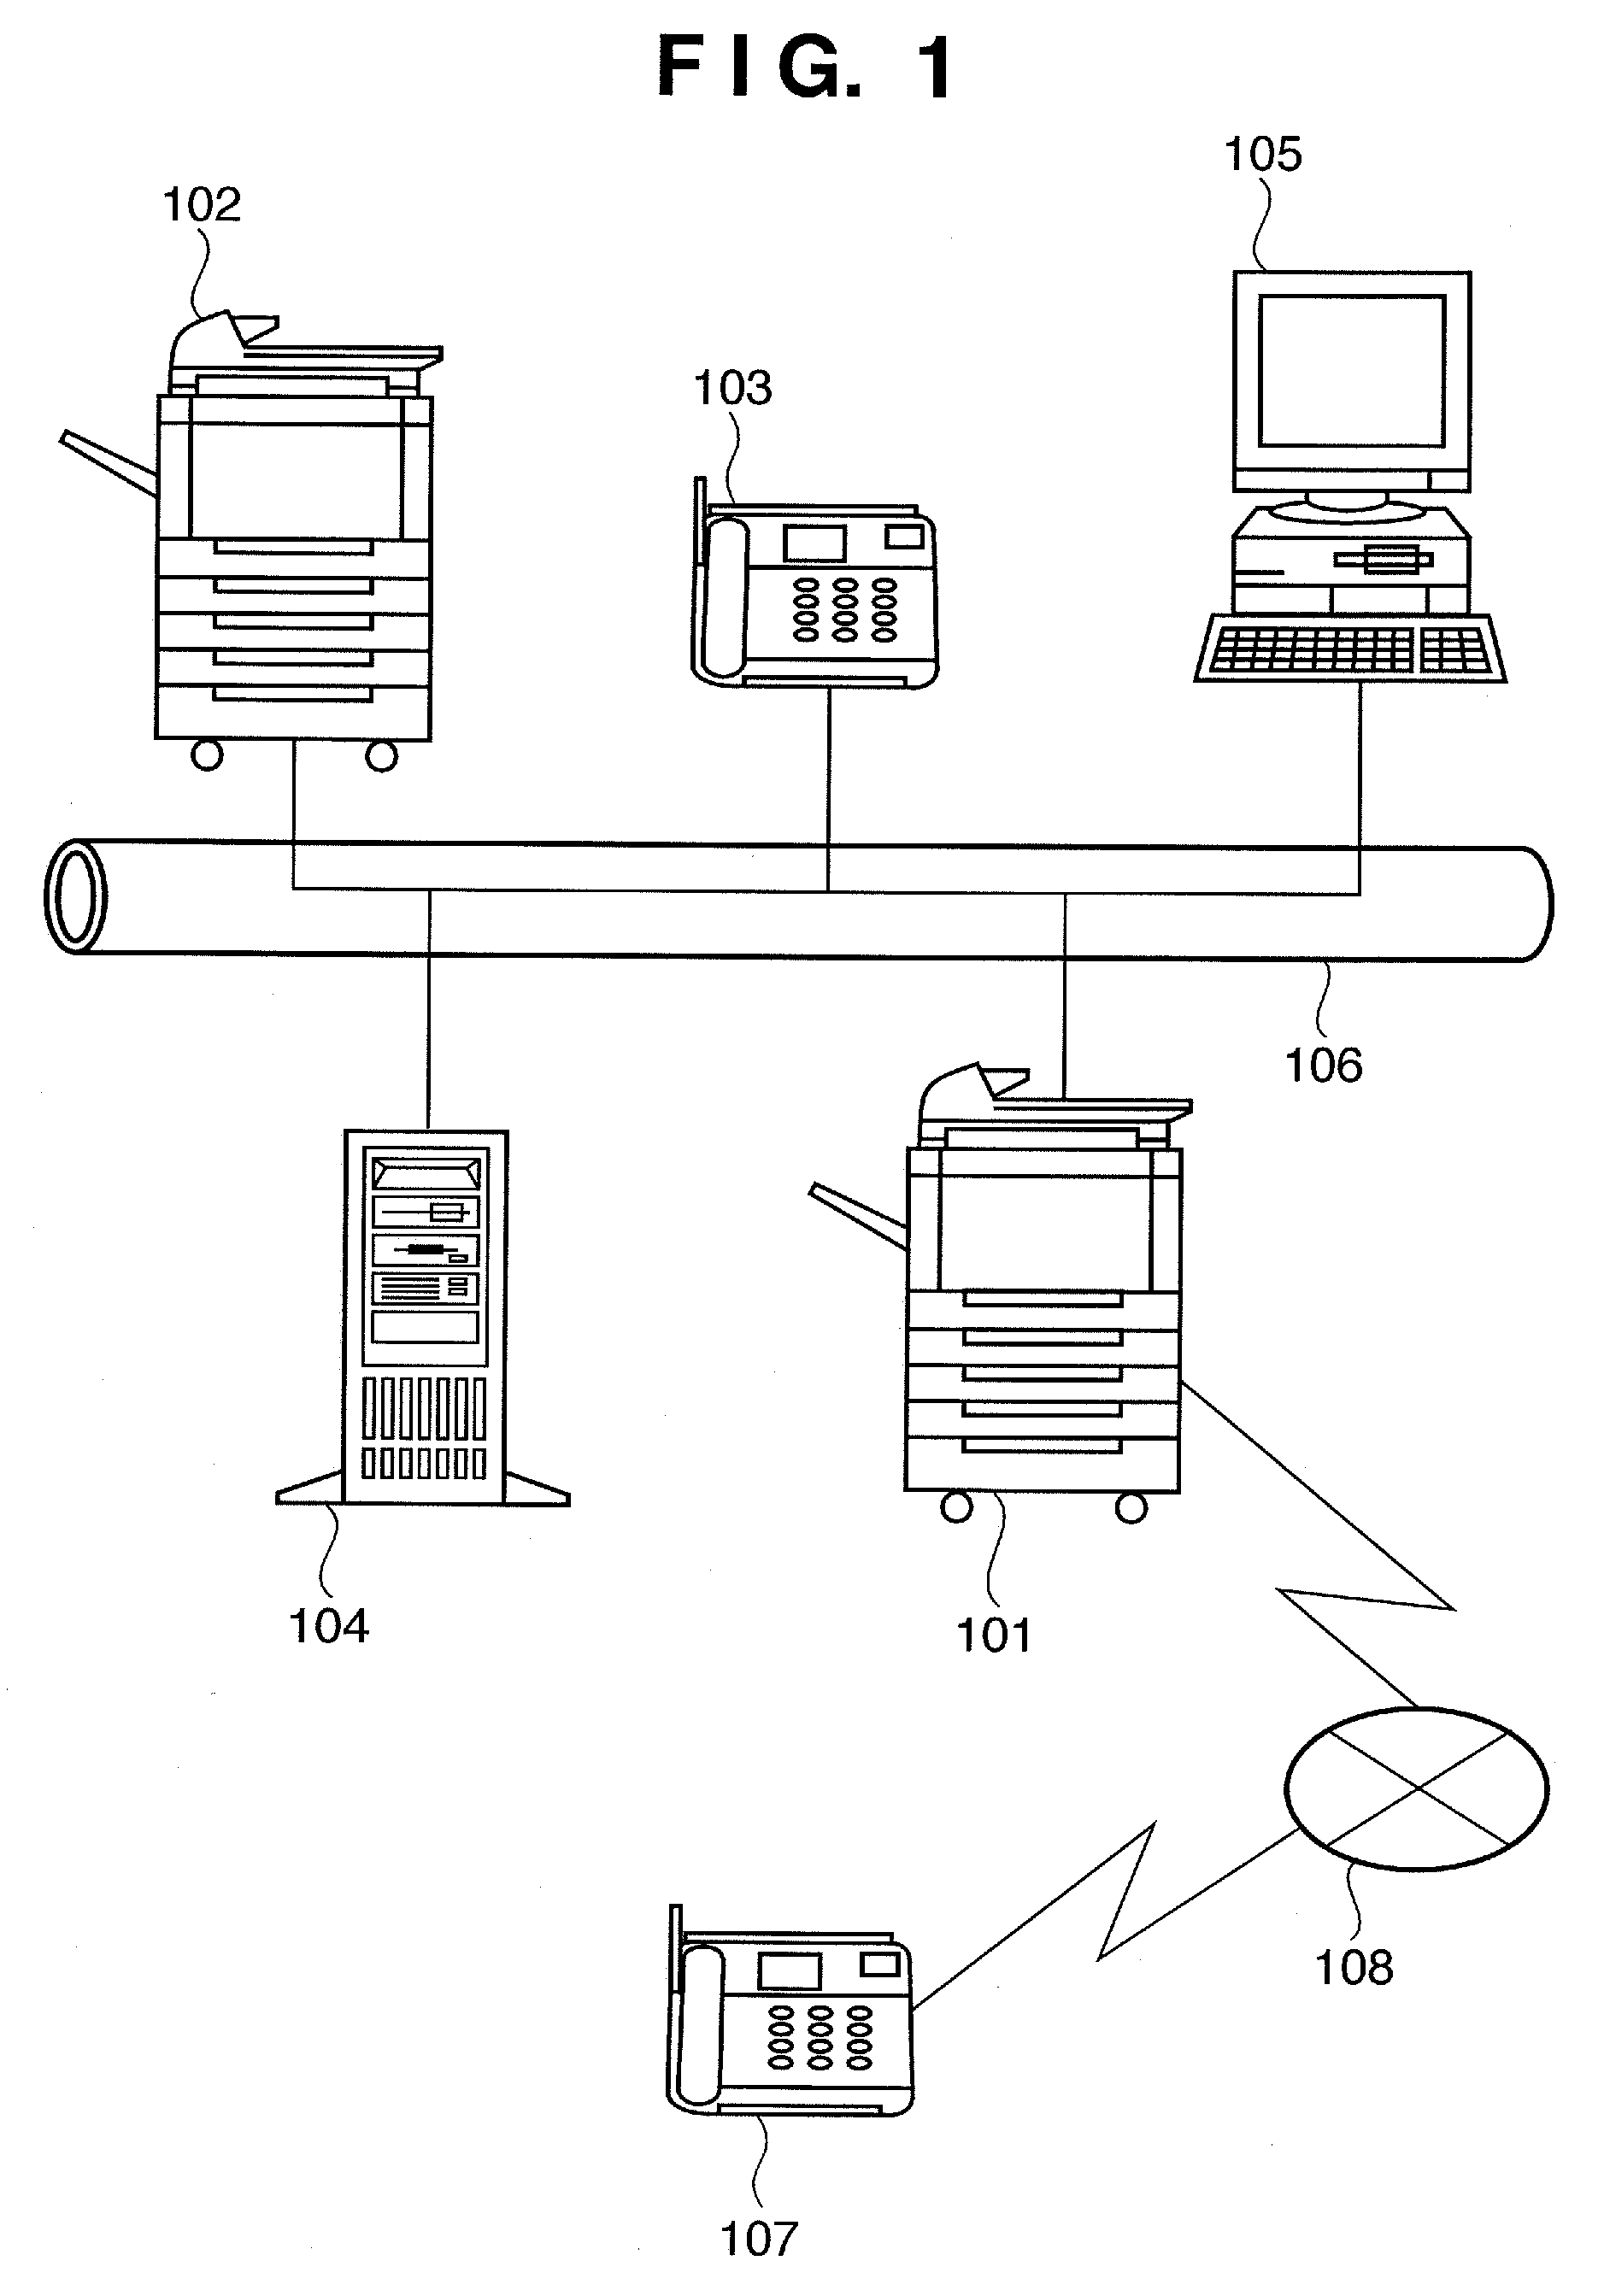 Image forming apparatus and information processing method